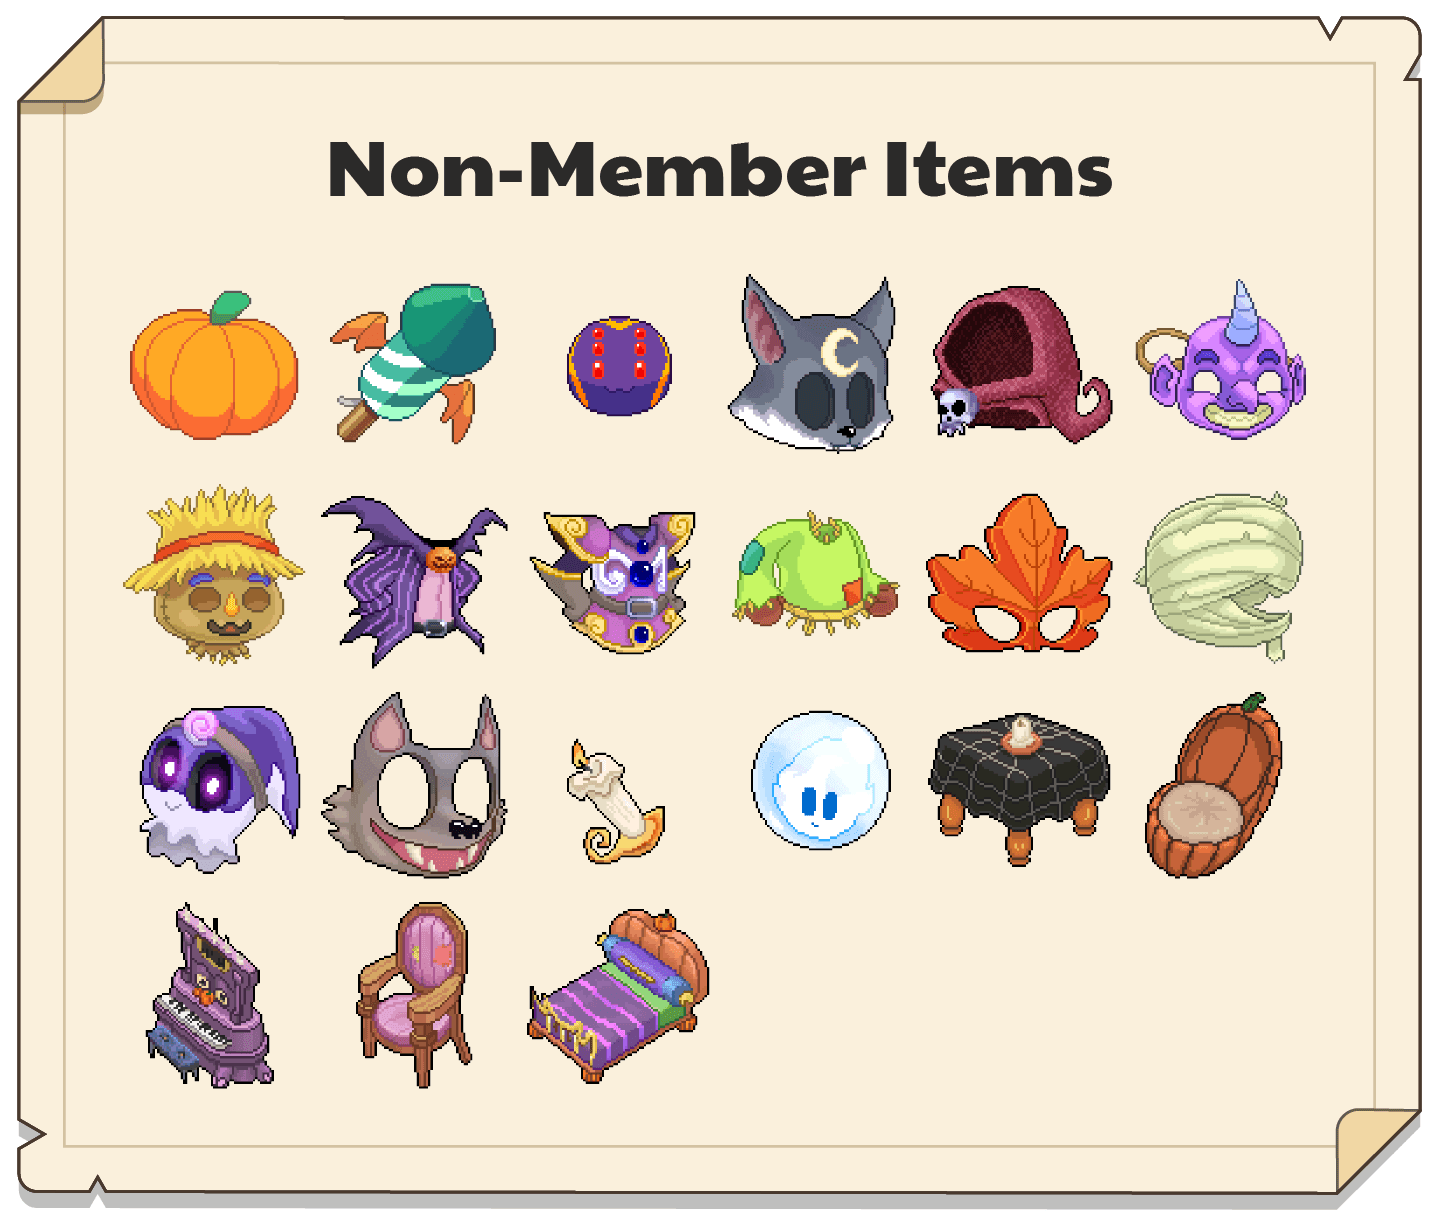 Gallery of Non-Member Pumpkinfest items